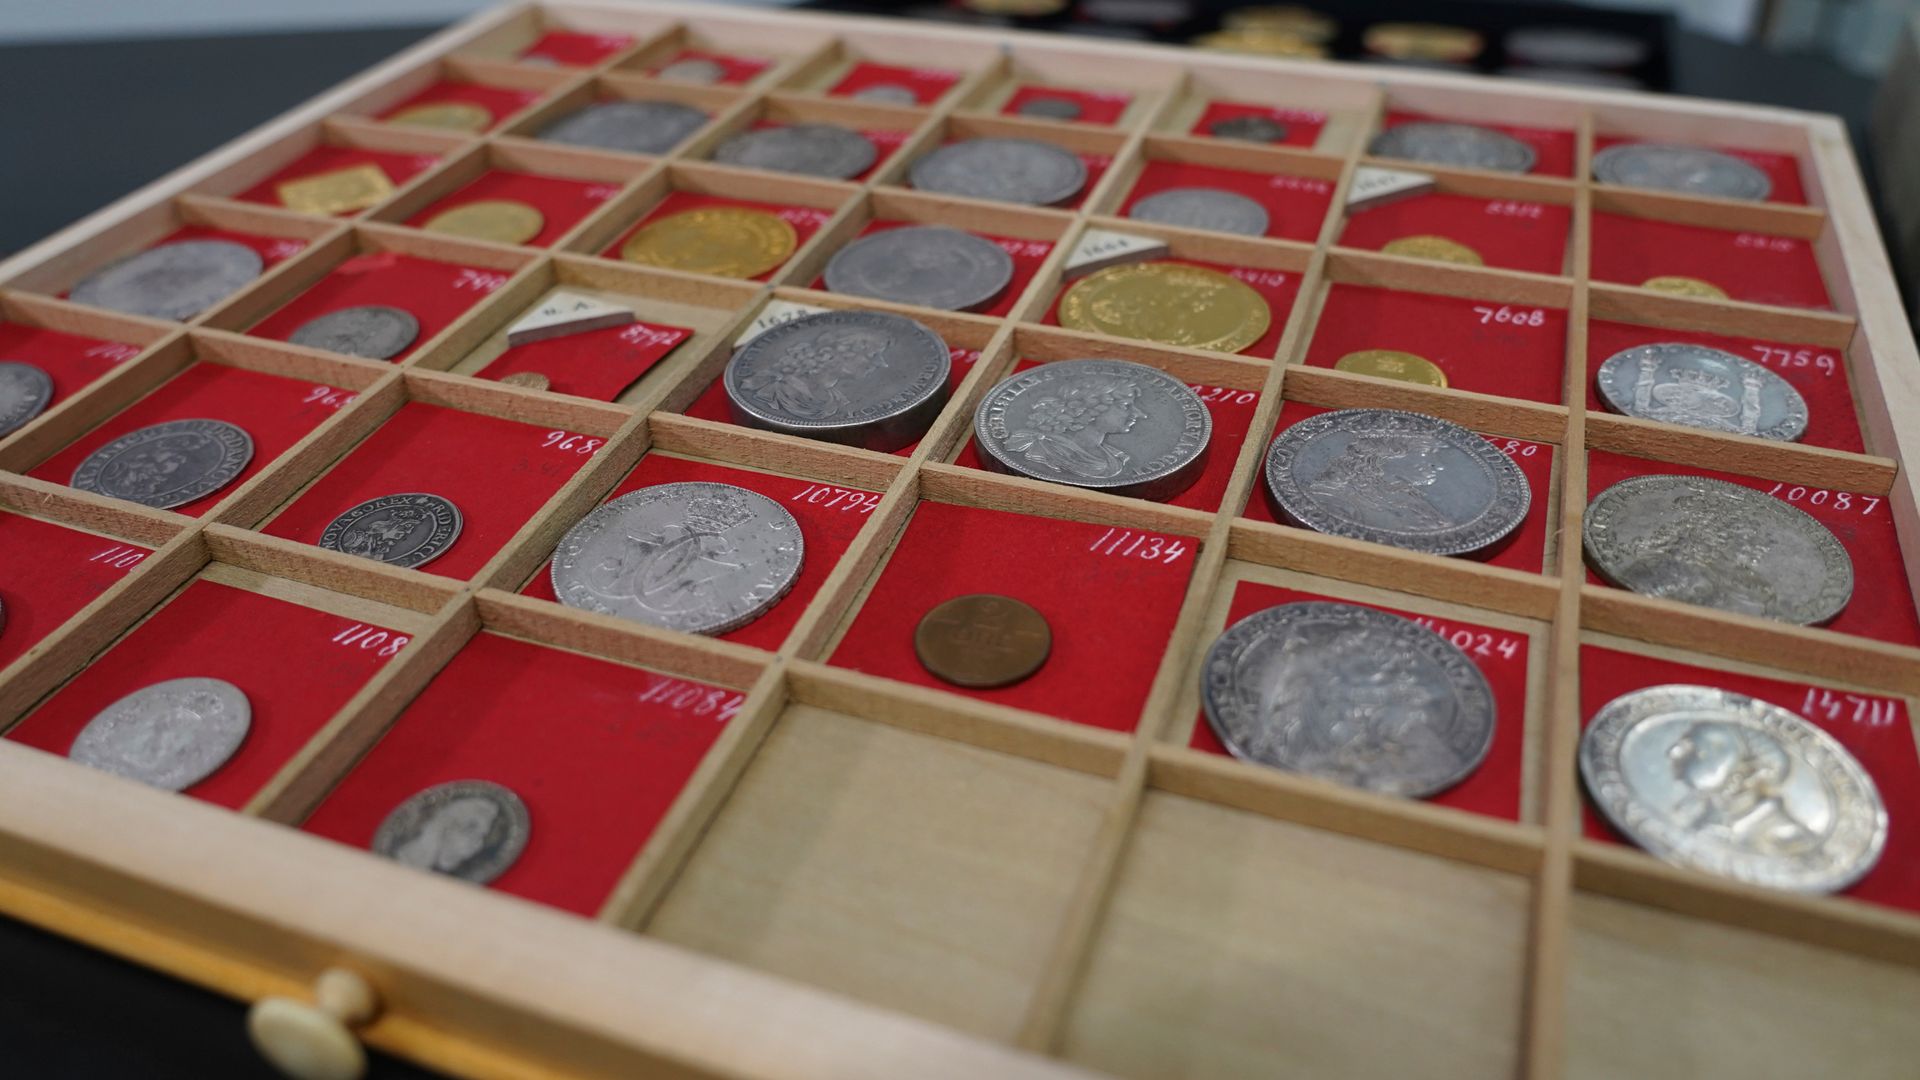 Rare coin collection sealed for 100 years going on sale